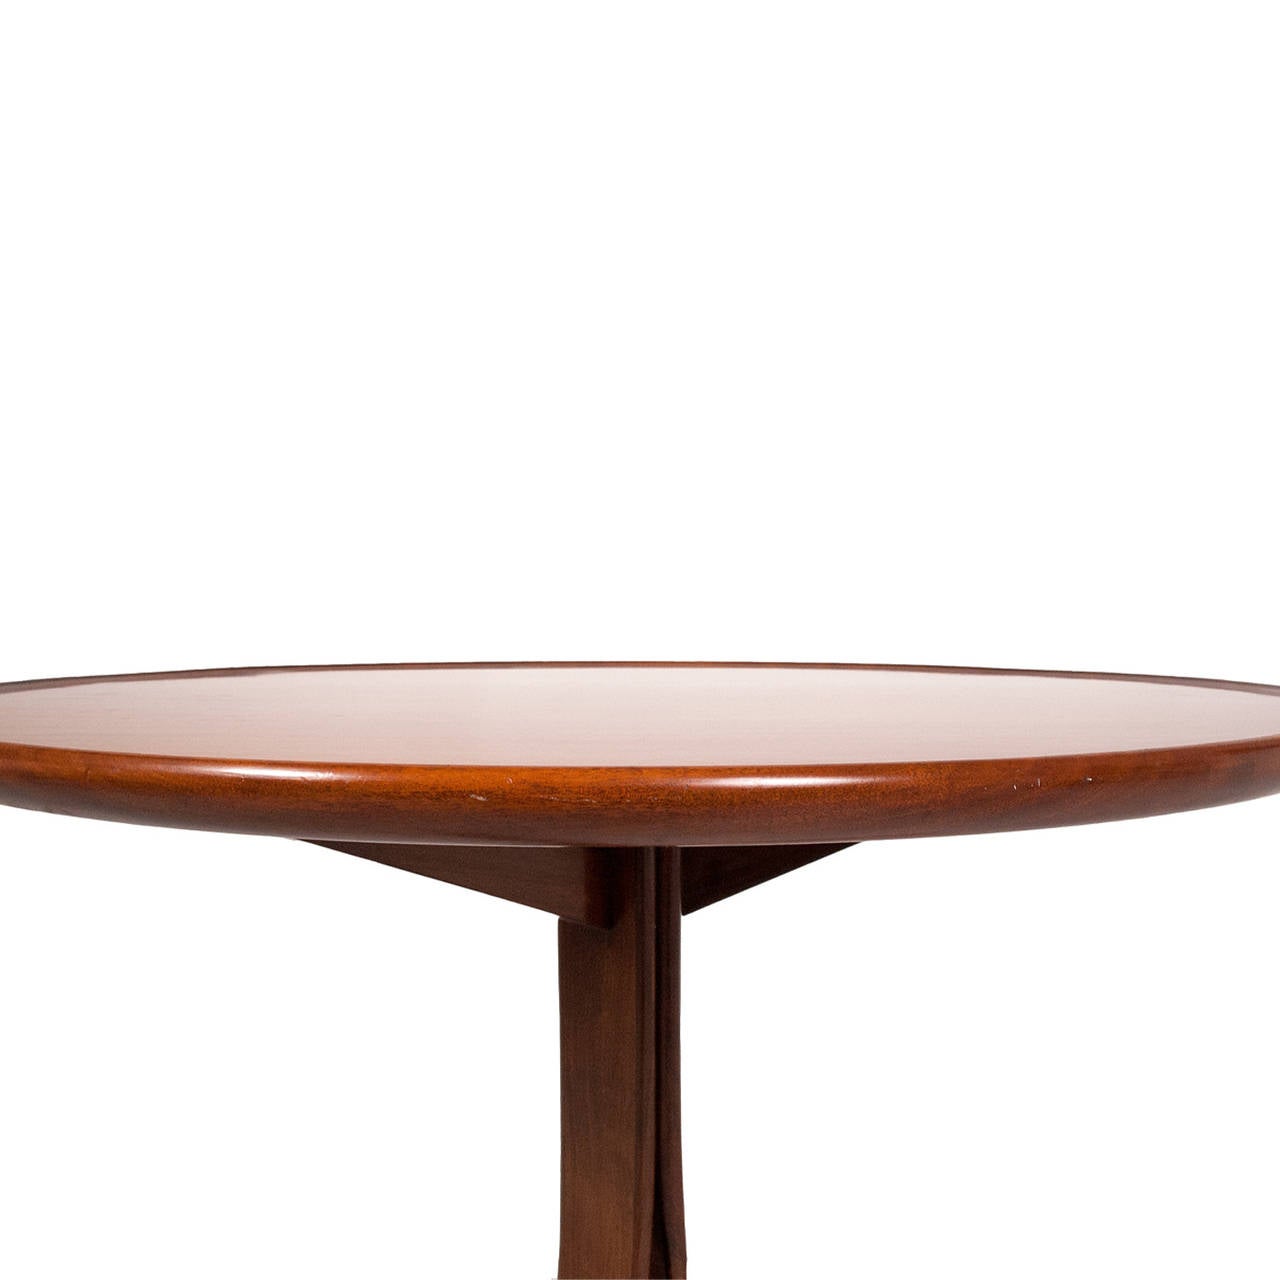 Solid mahogany coffee table / lamp table design and made by Frits Henningsen, Support on three curved legs with brass ands